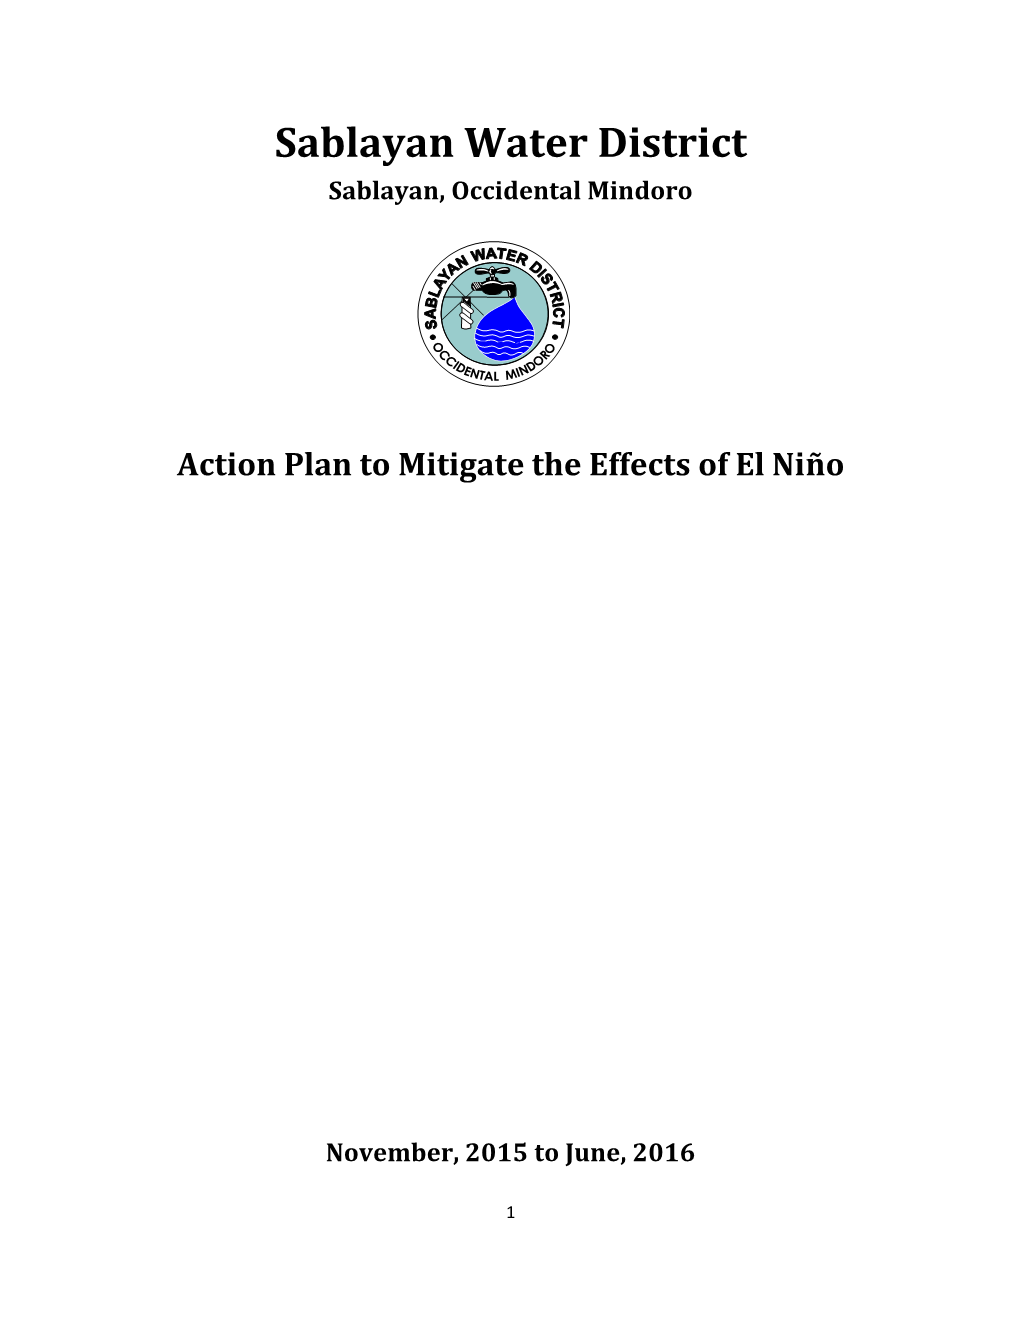 Action Plan to Mitigate the Effects of El Niño